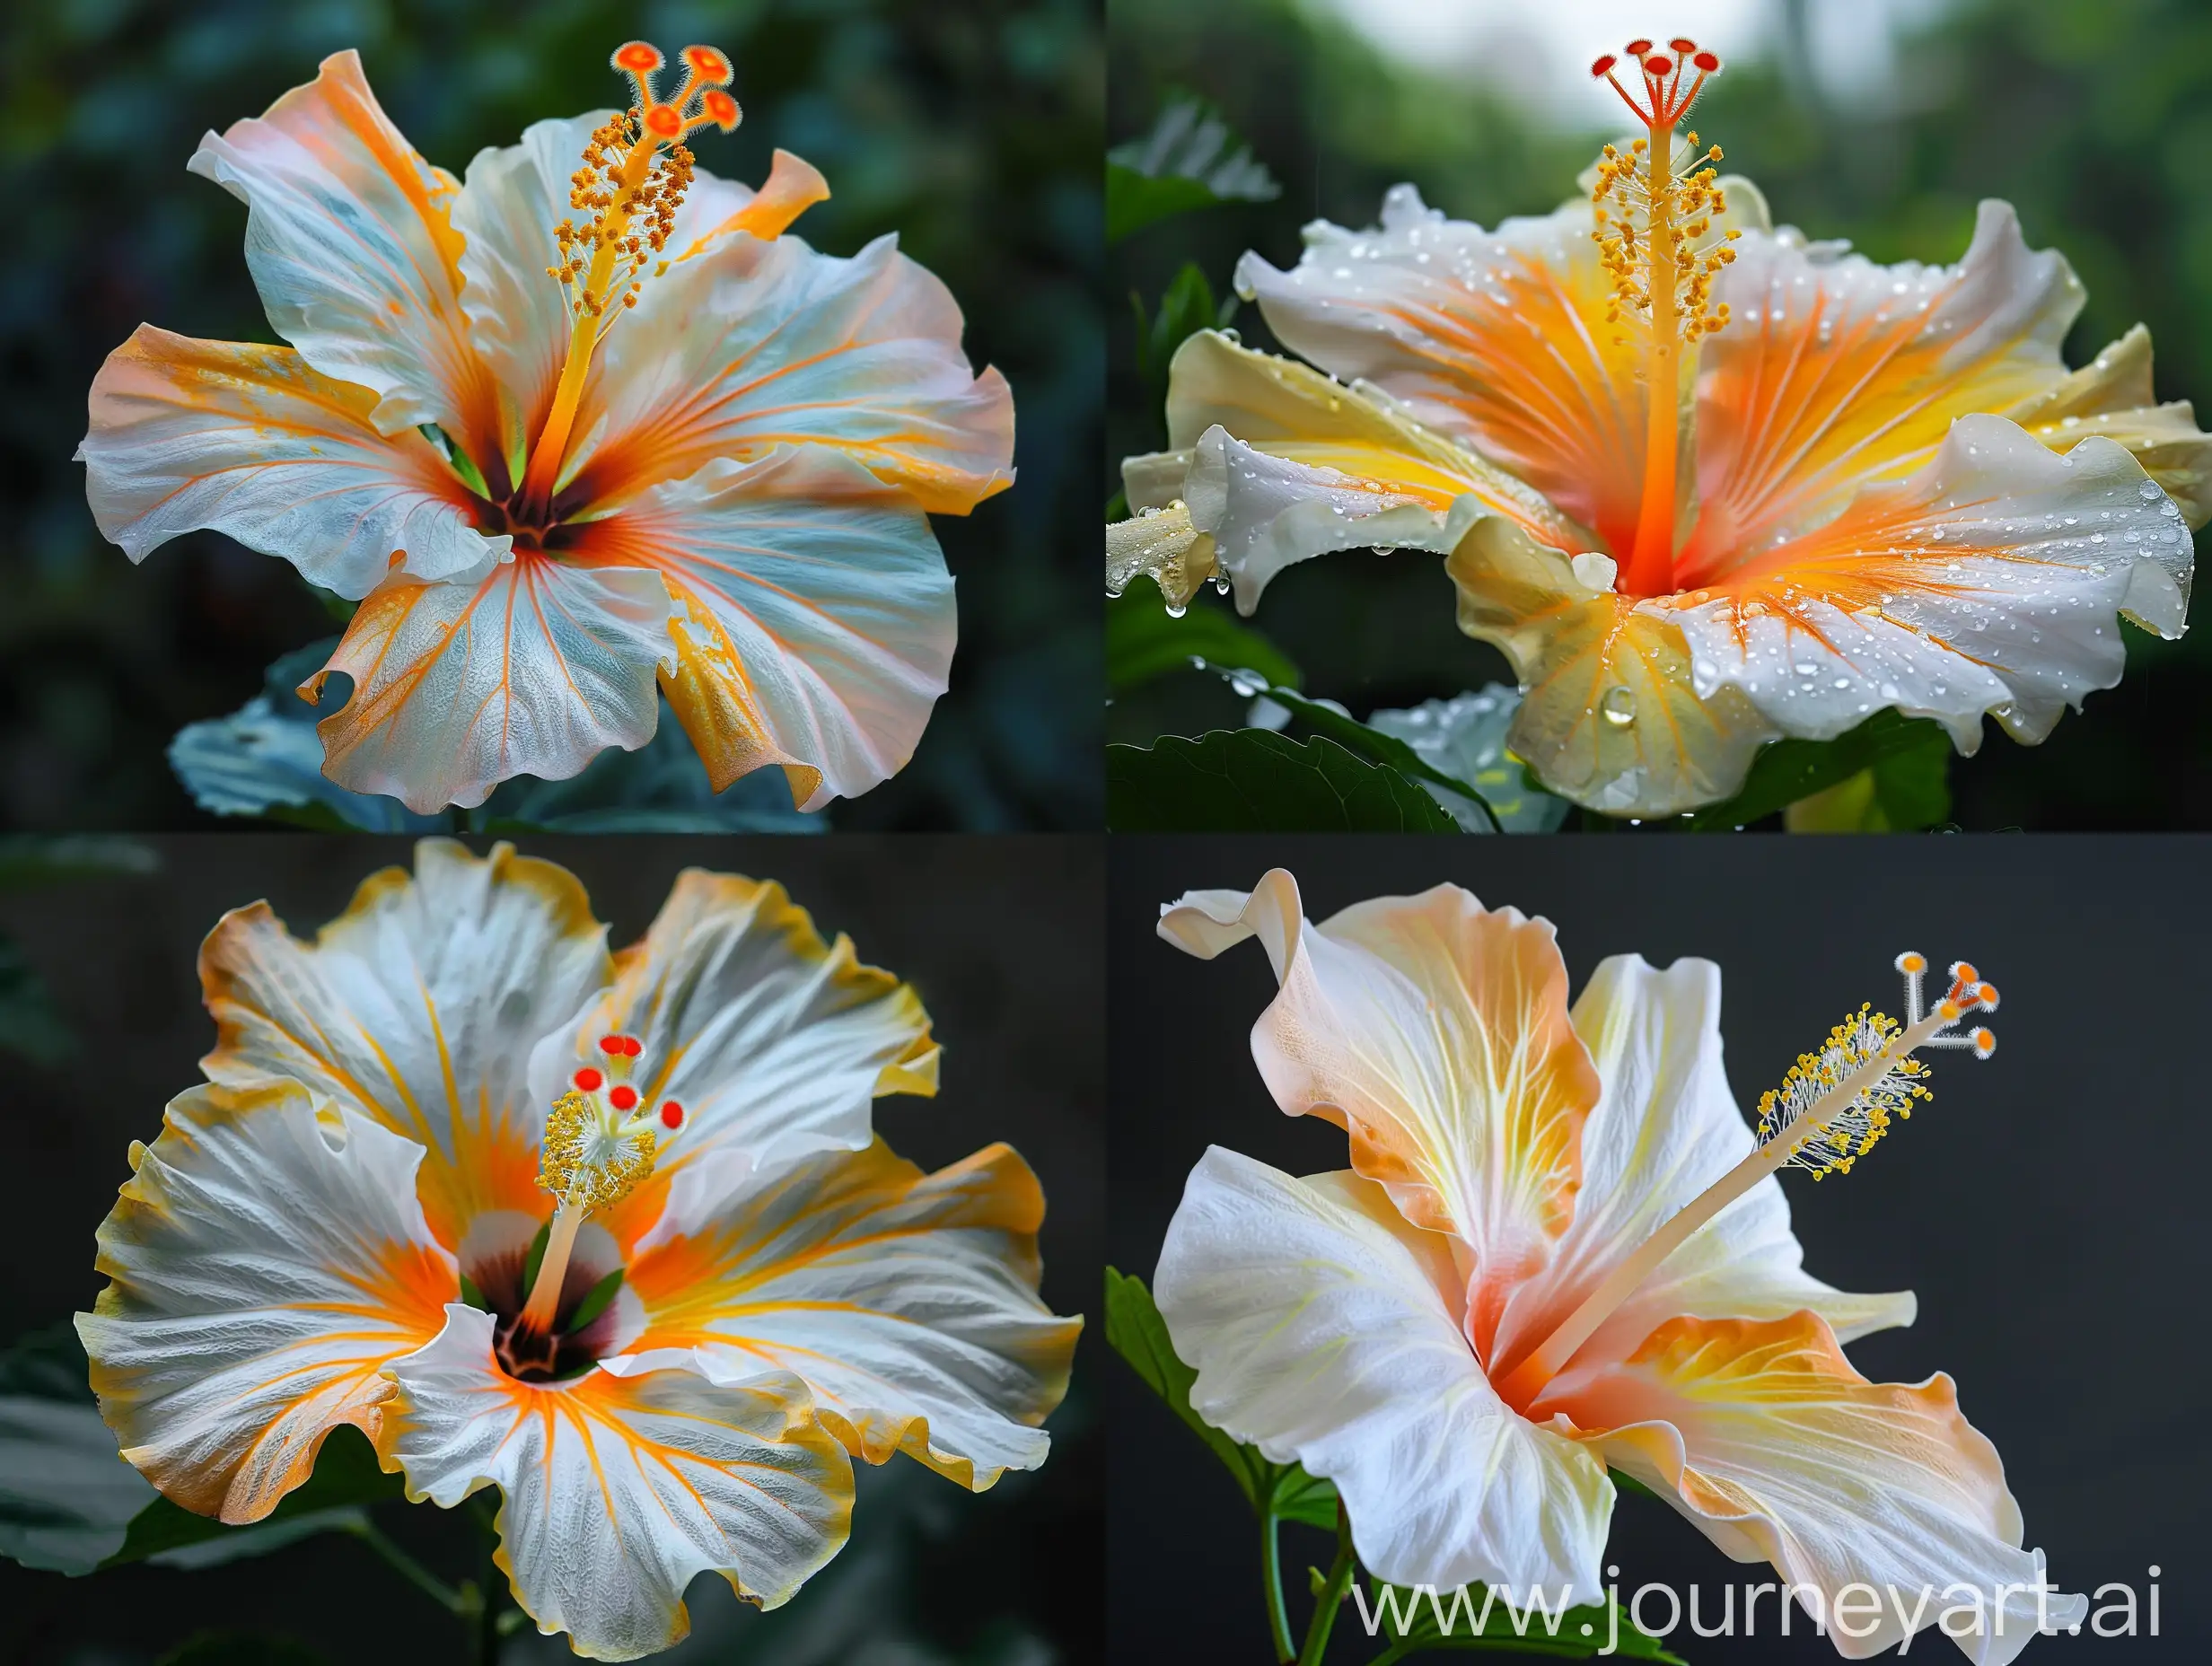 Vibrant-Tropical-Hibiscus-Flower-in-White-Orange-and-Yellow